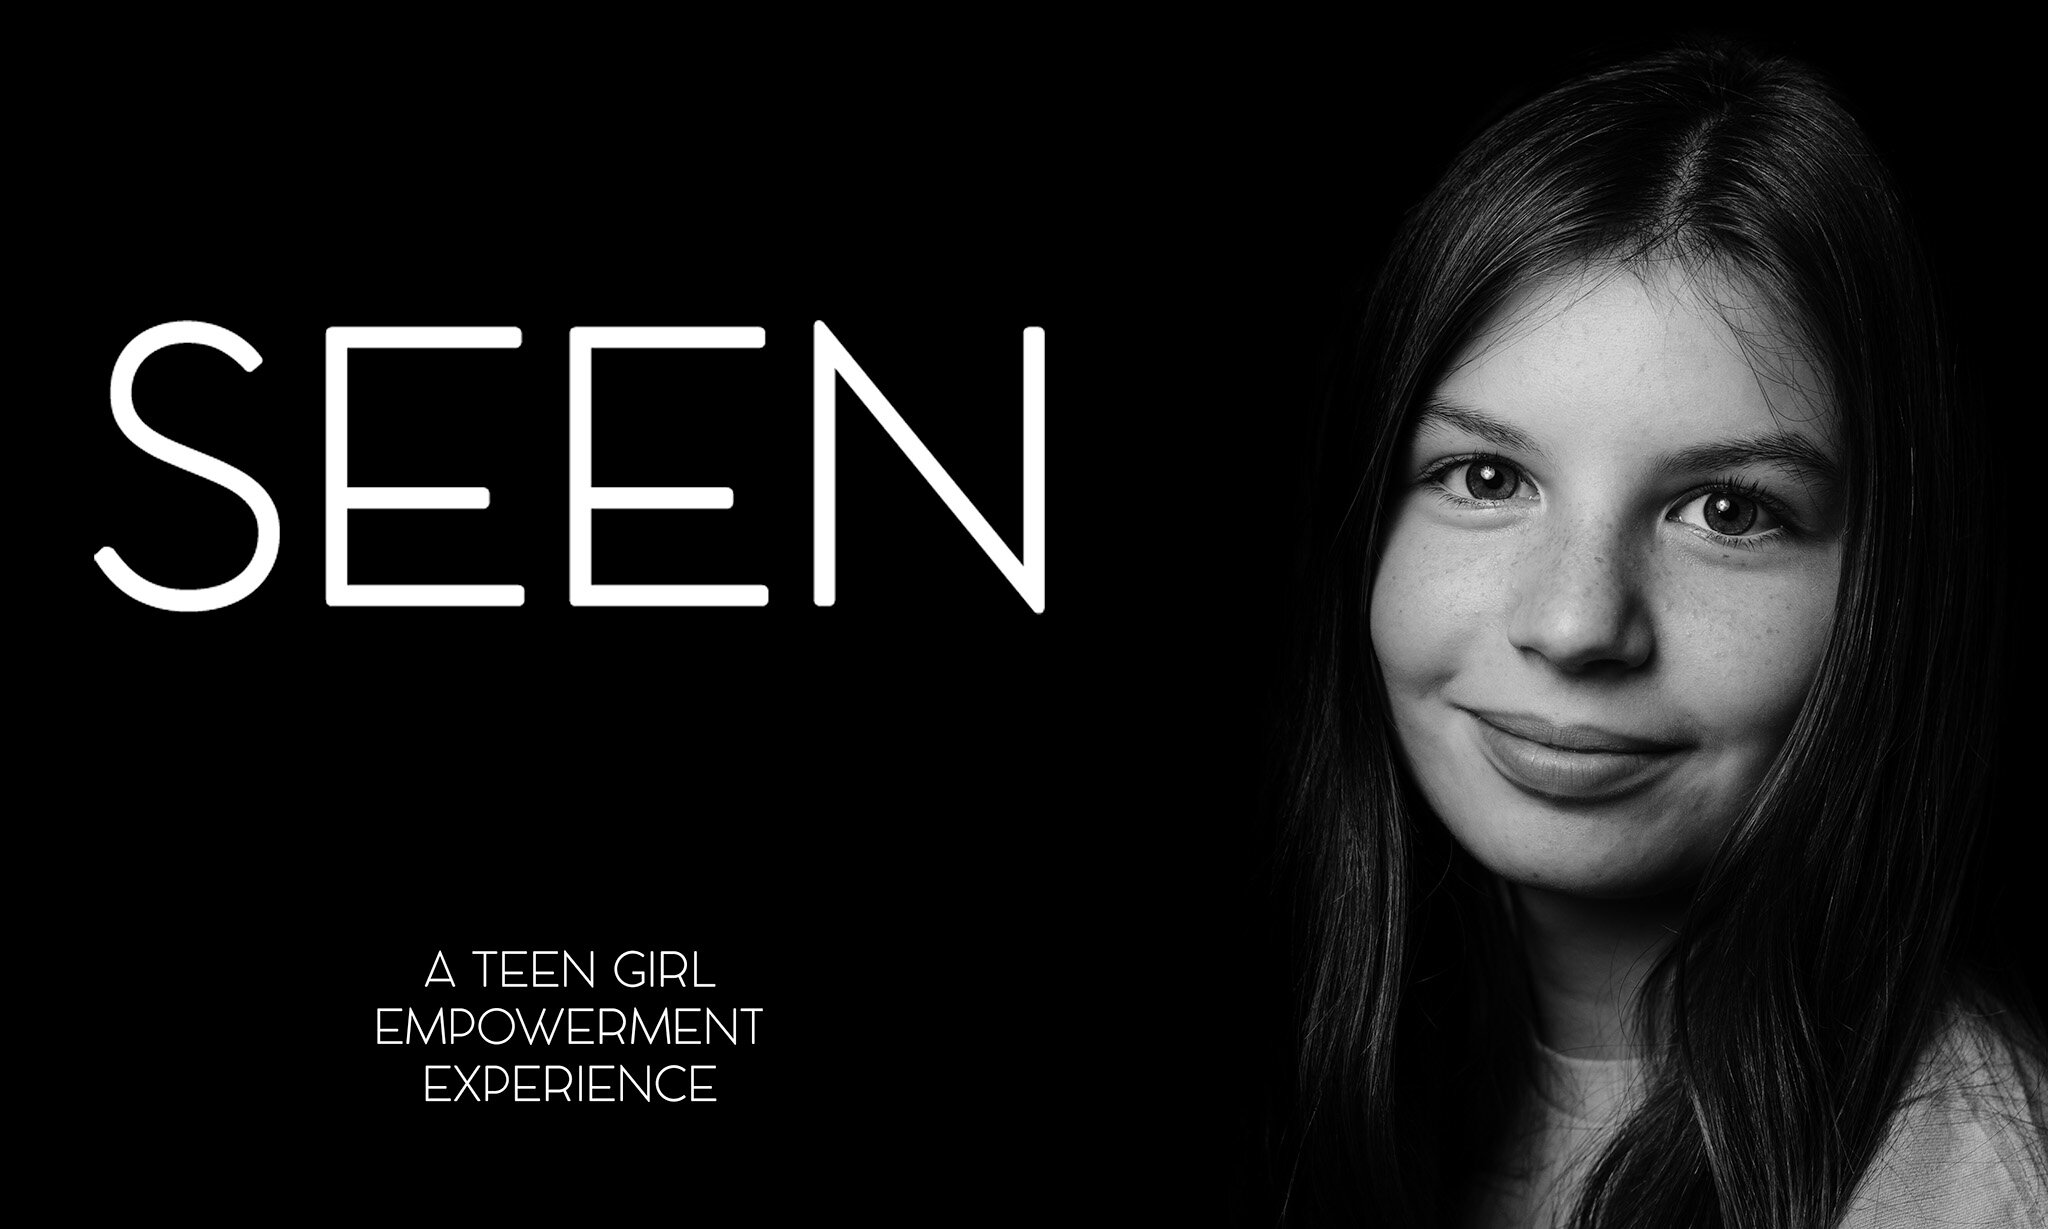 Ever felt that tug in your heart when you see your teen daughter navigating the expectations swirling around her?

I've been there.

That's why I&rsquo;m introducing something truly special&mdash;a portrait experience designed to embrace the raw, aut